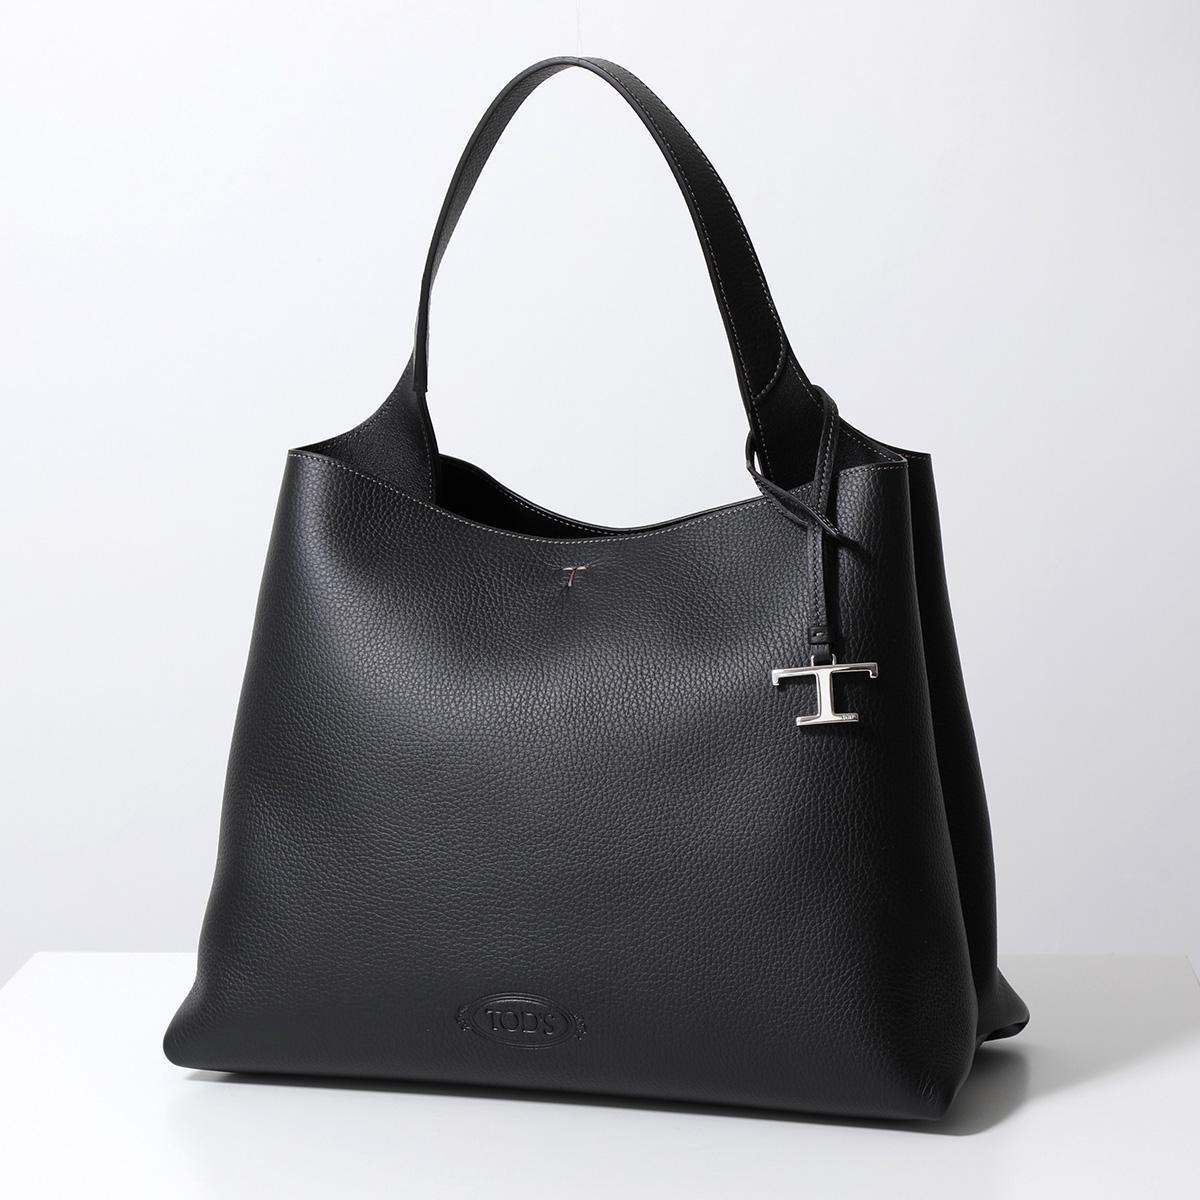 TODS トートバッグ T TIMELESS Tタイムレス XBWAPAA9300QRI レディース...